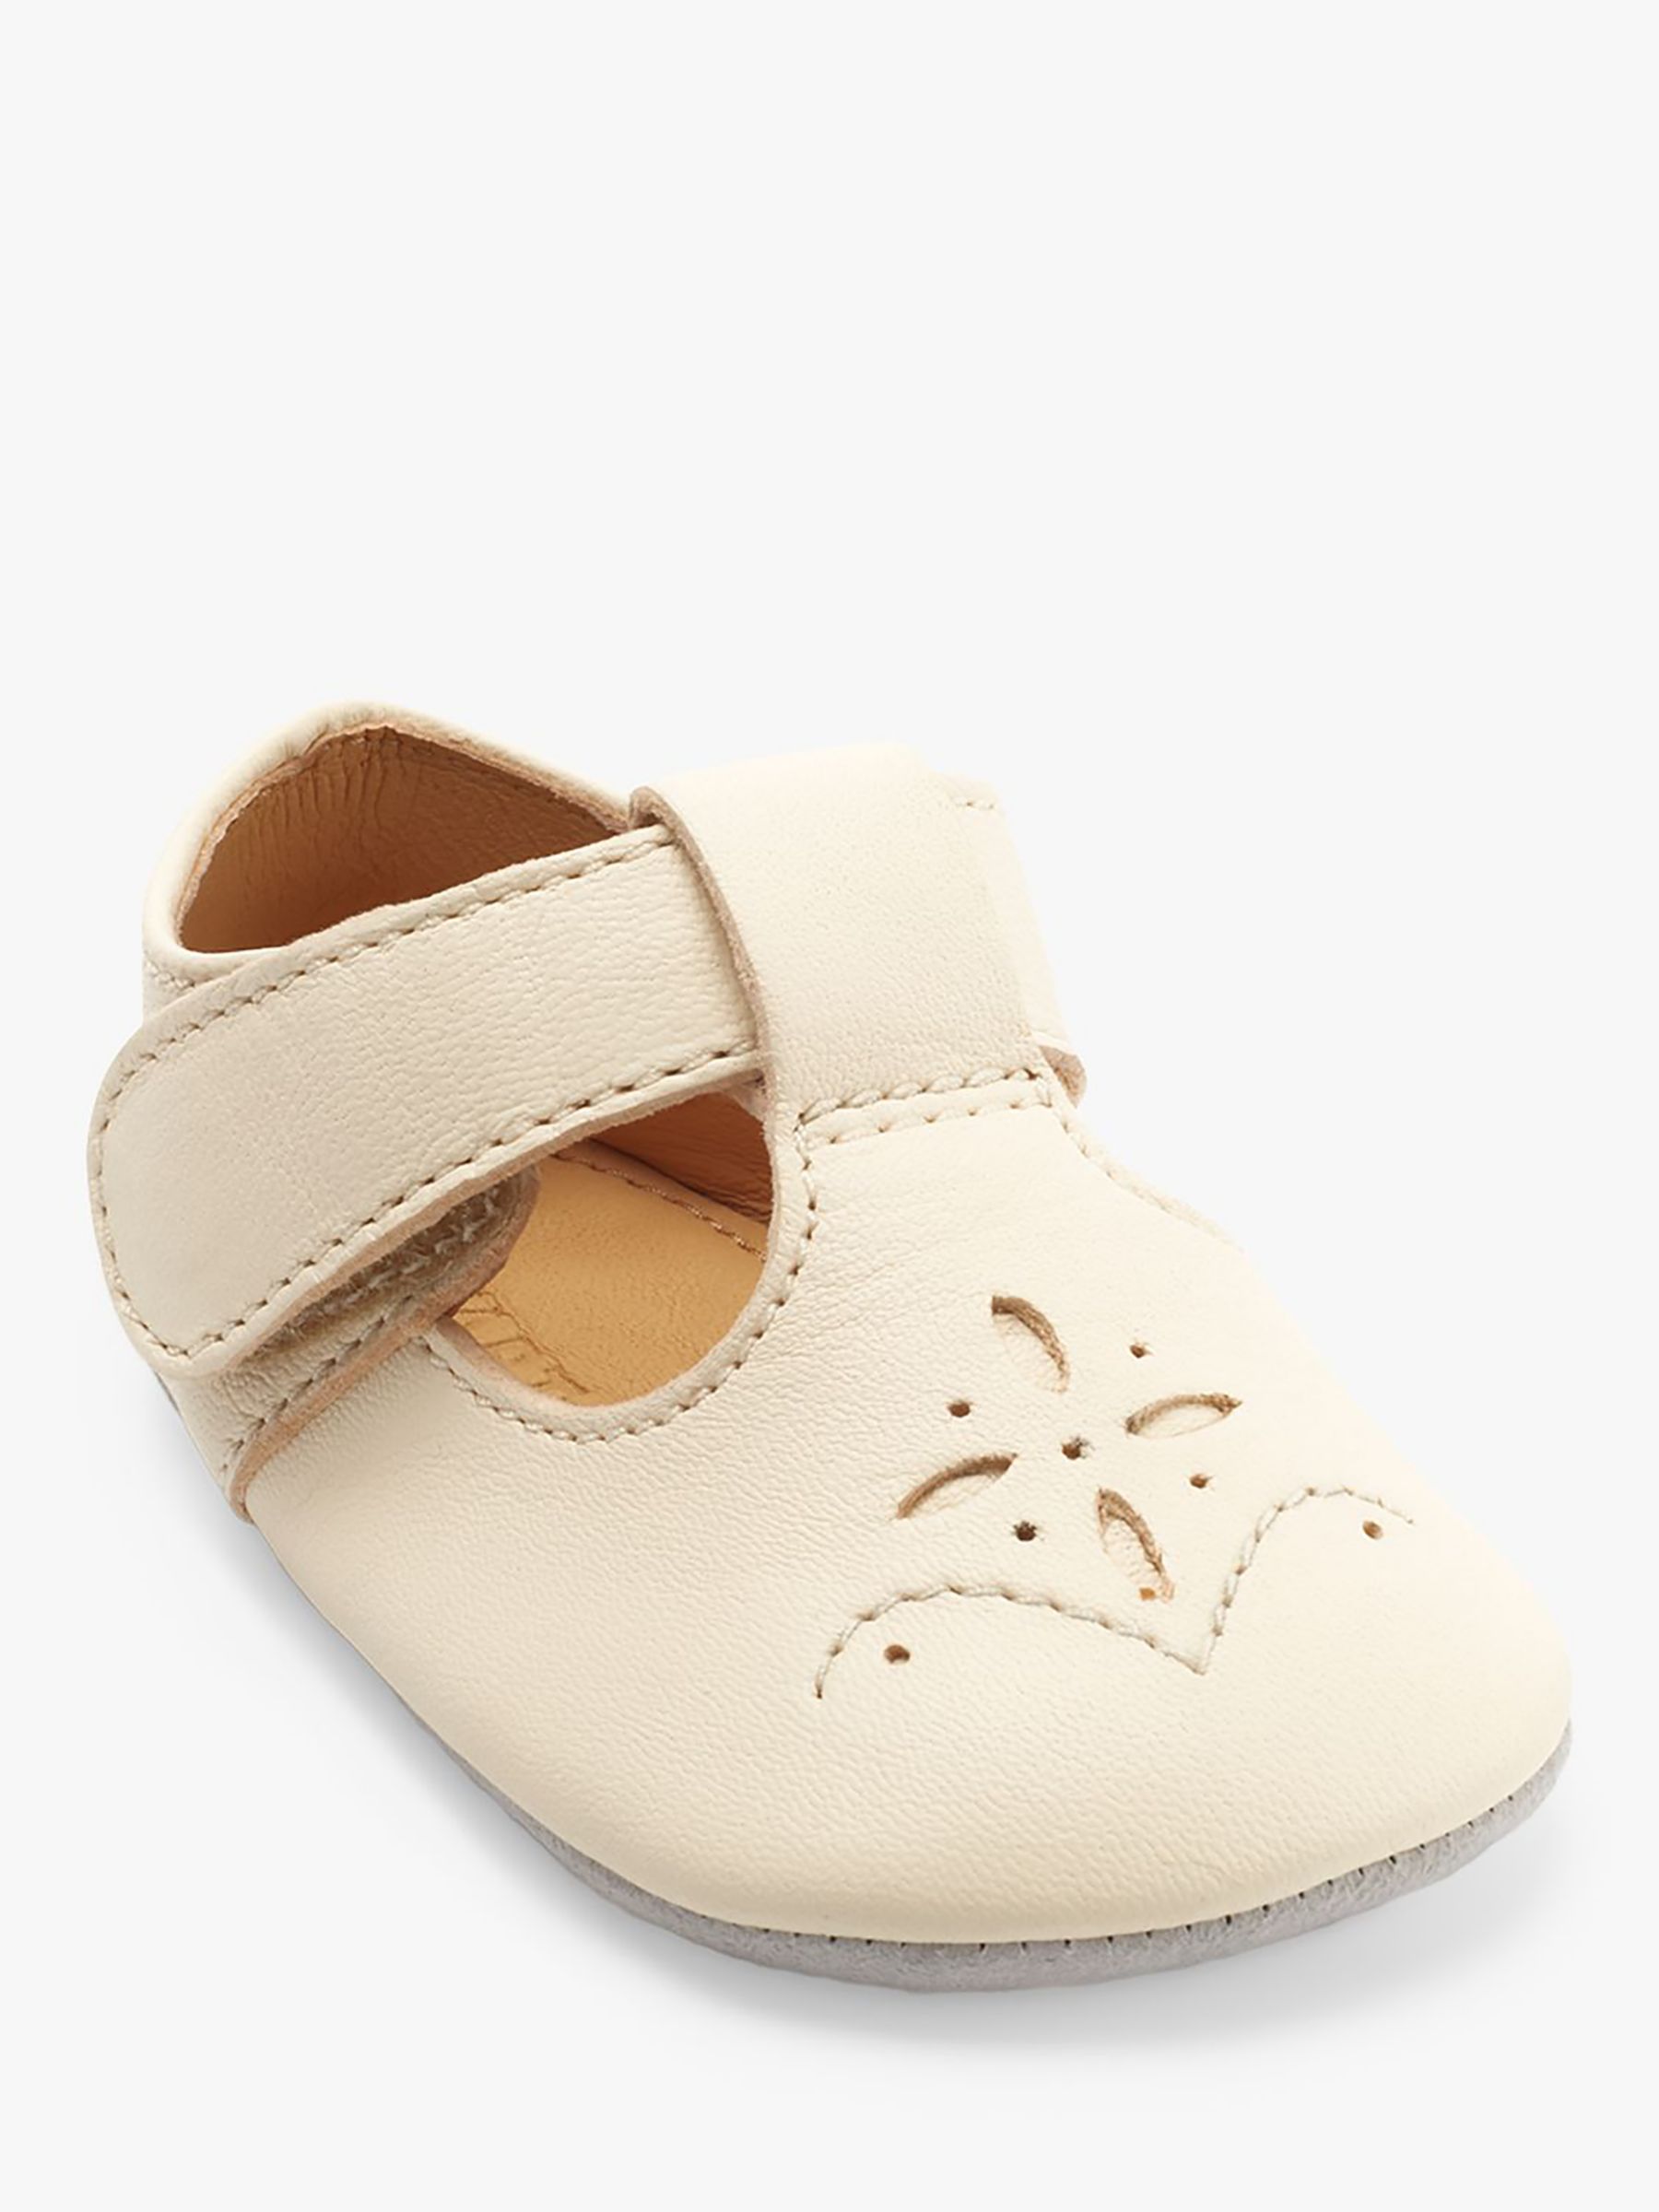 Start-Rite Kids' Rhyme Punching Pre-Walker Shoes, Cream Leather, 0-3 months